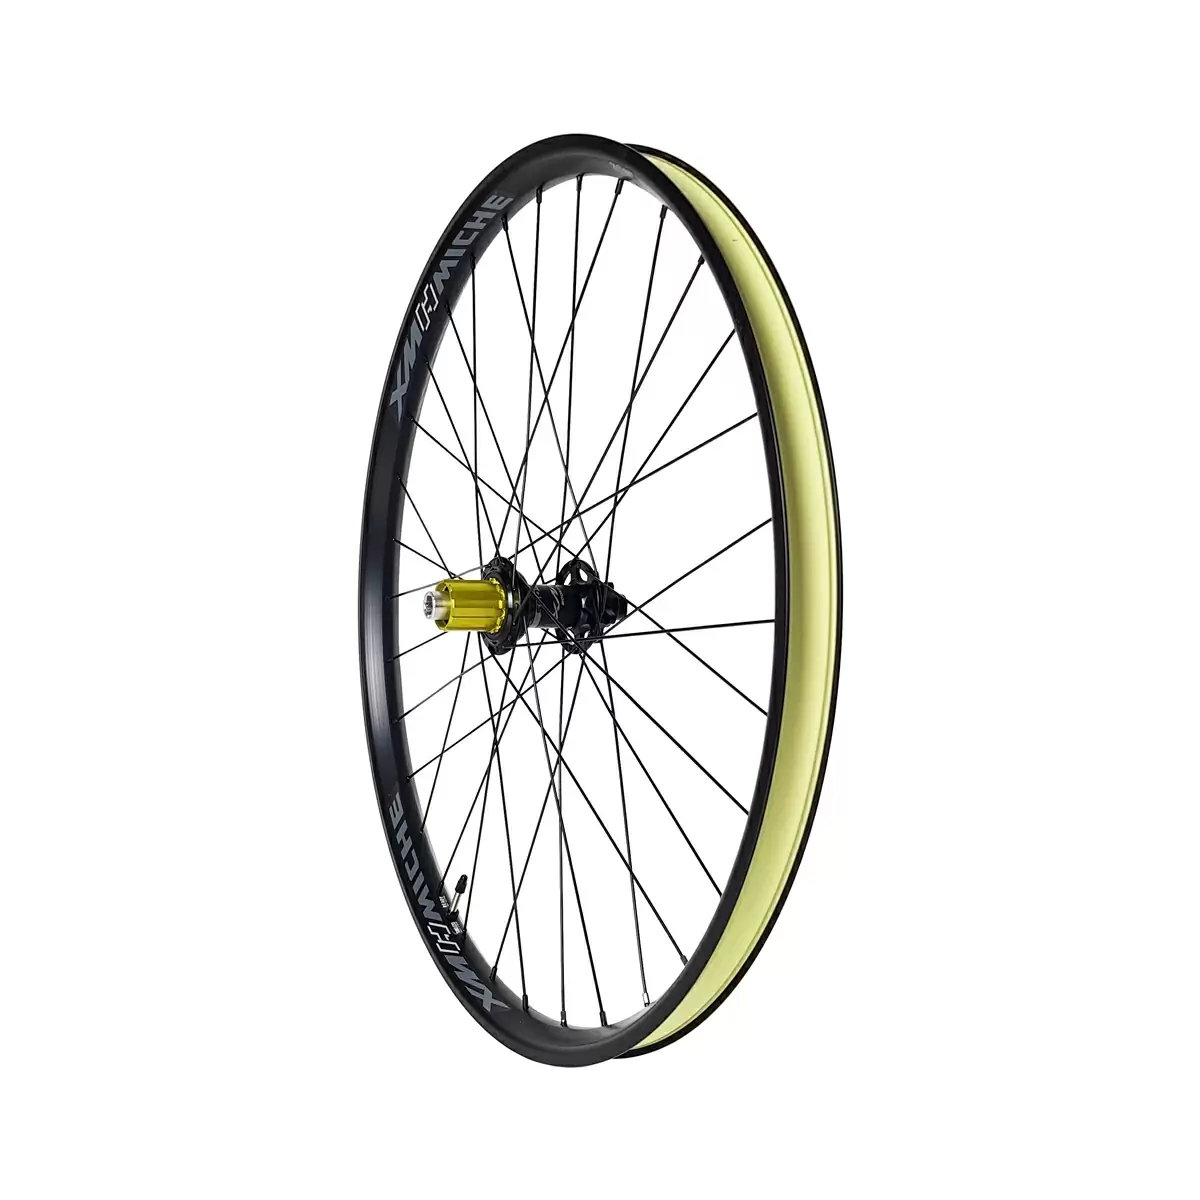 Ruota posteriore Boost ebike 29'' XMH30 AXY canale interno 30mm 10/11v Tubeless ready - image